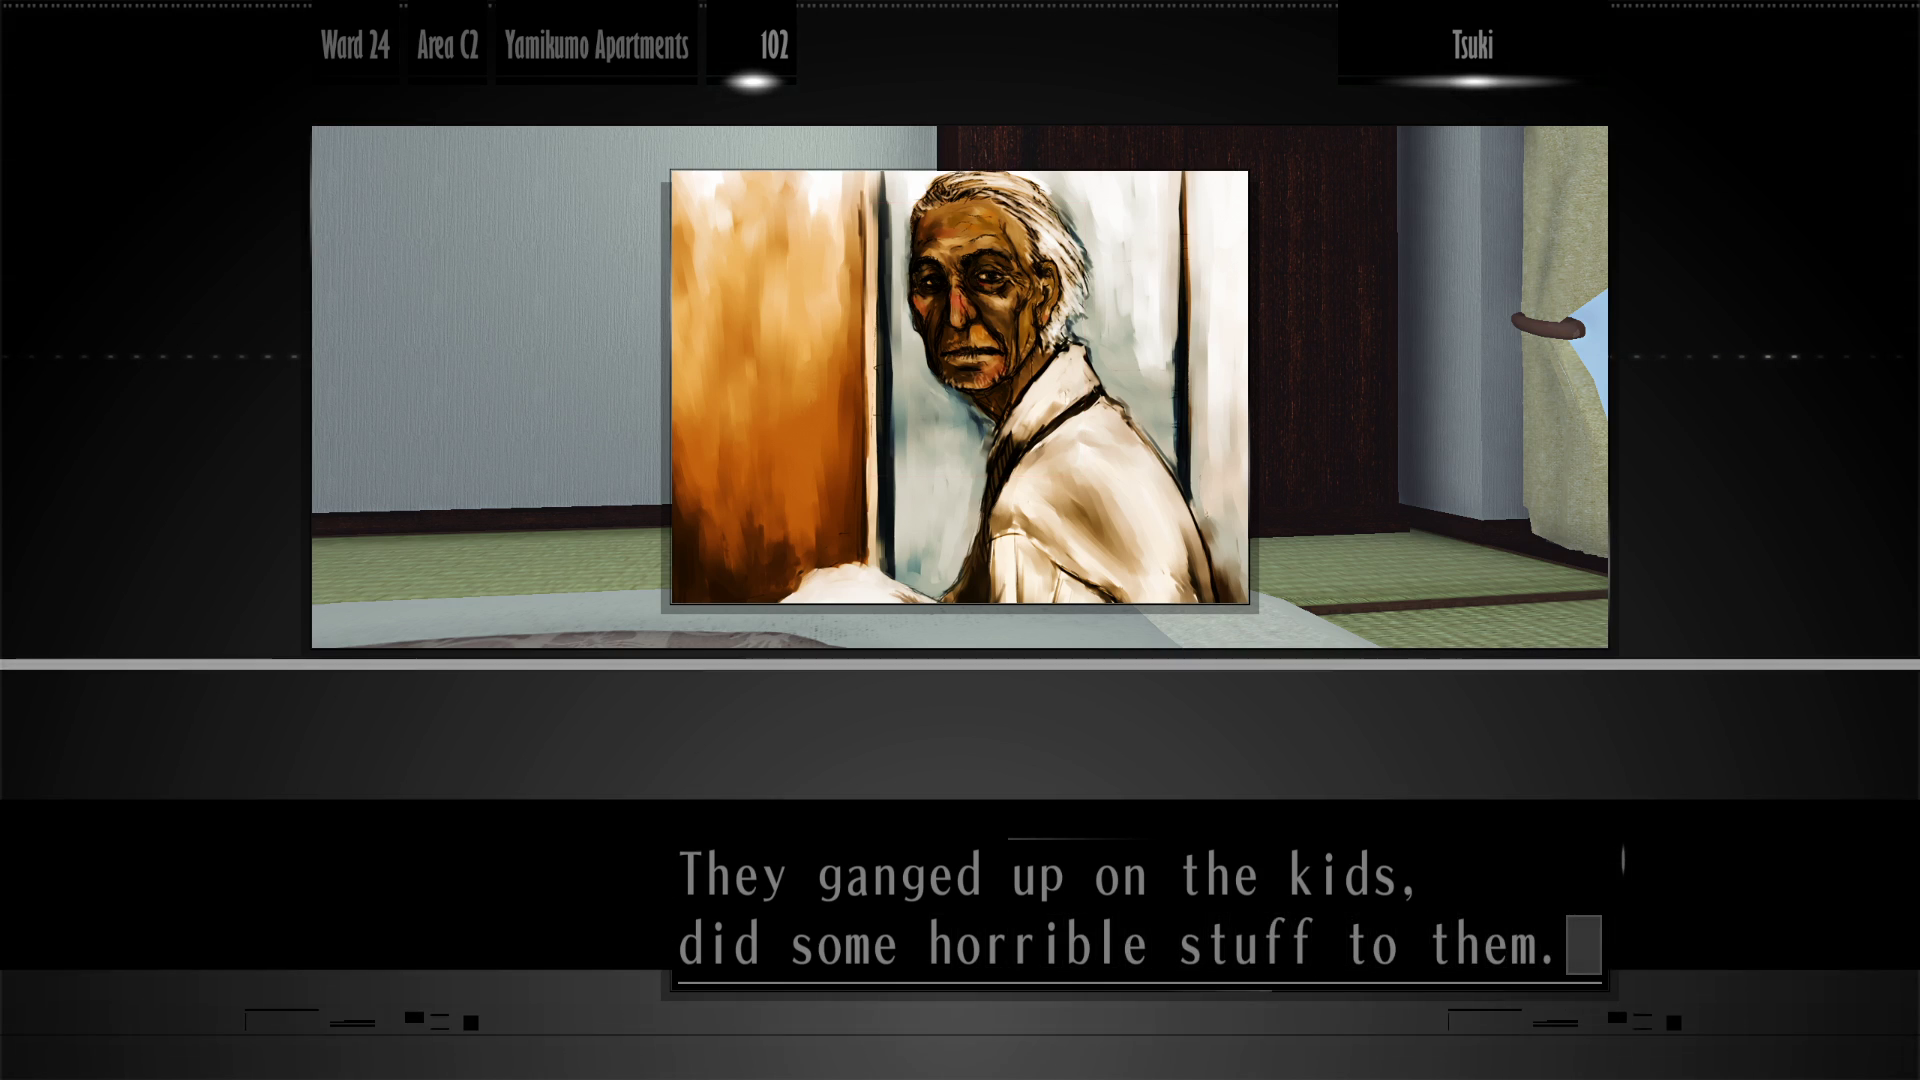 Screenshot from "TSUKI." The Mikumo survivor says, "They ganged up on the kids, did some horrible stuff to them."